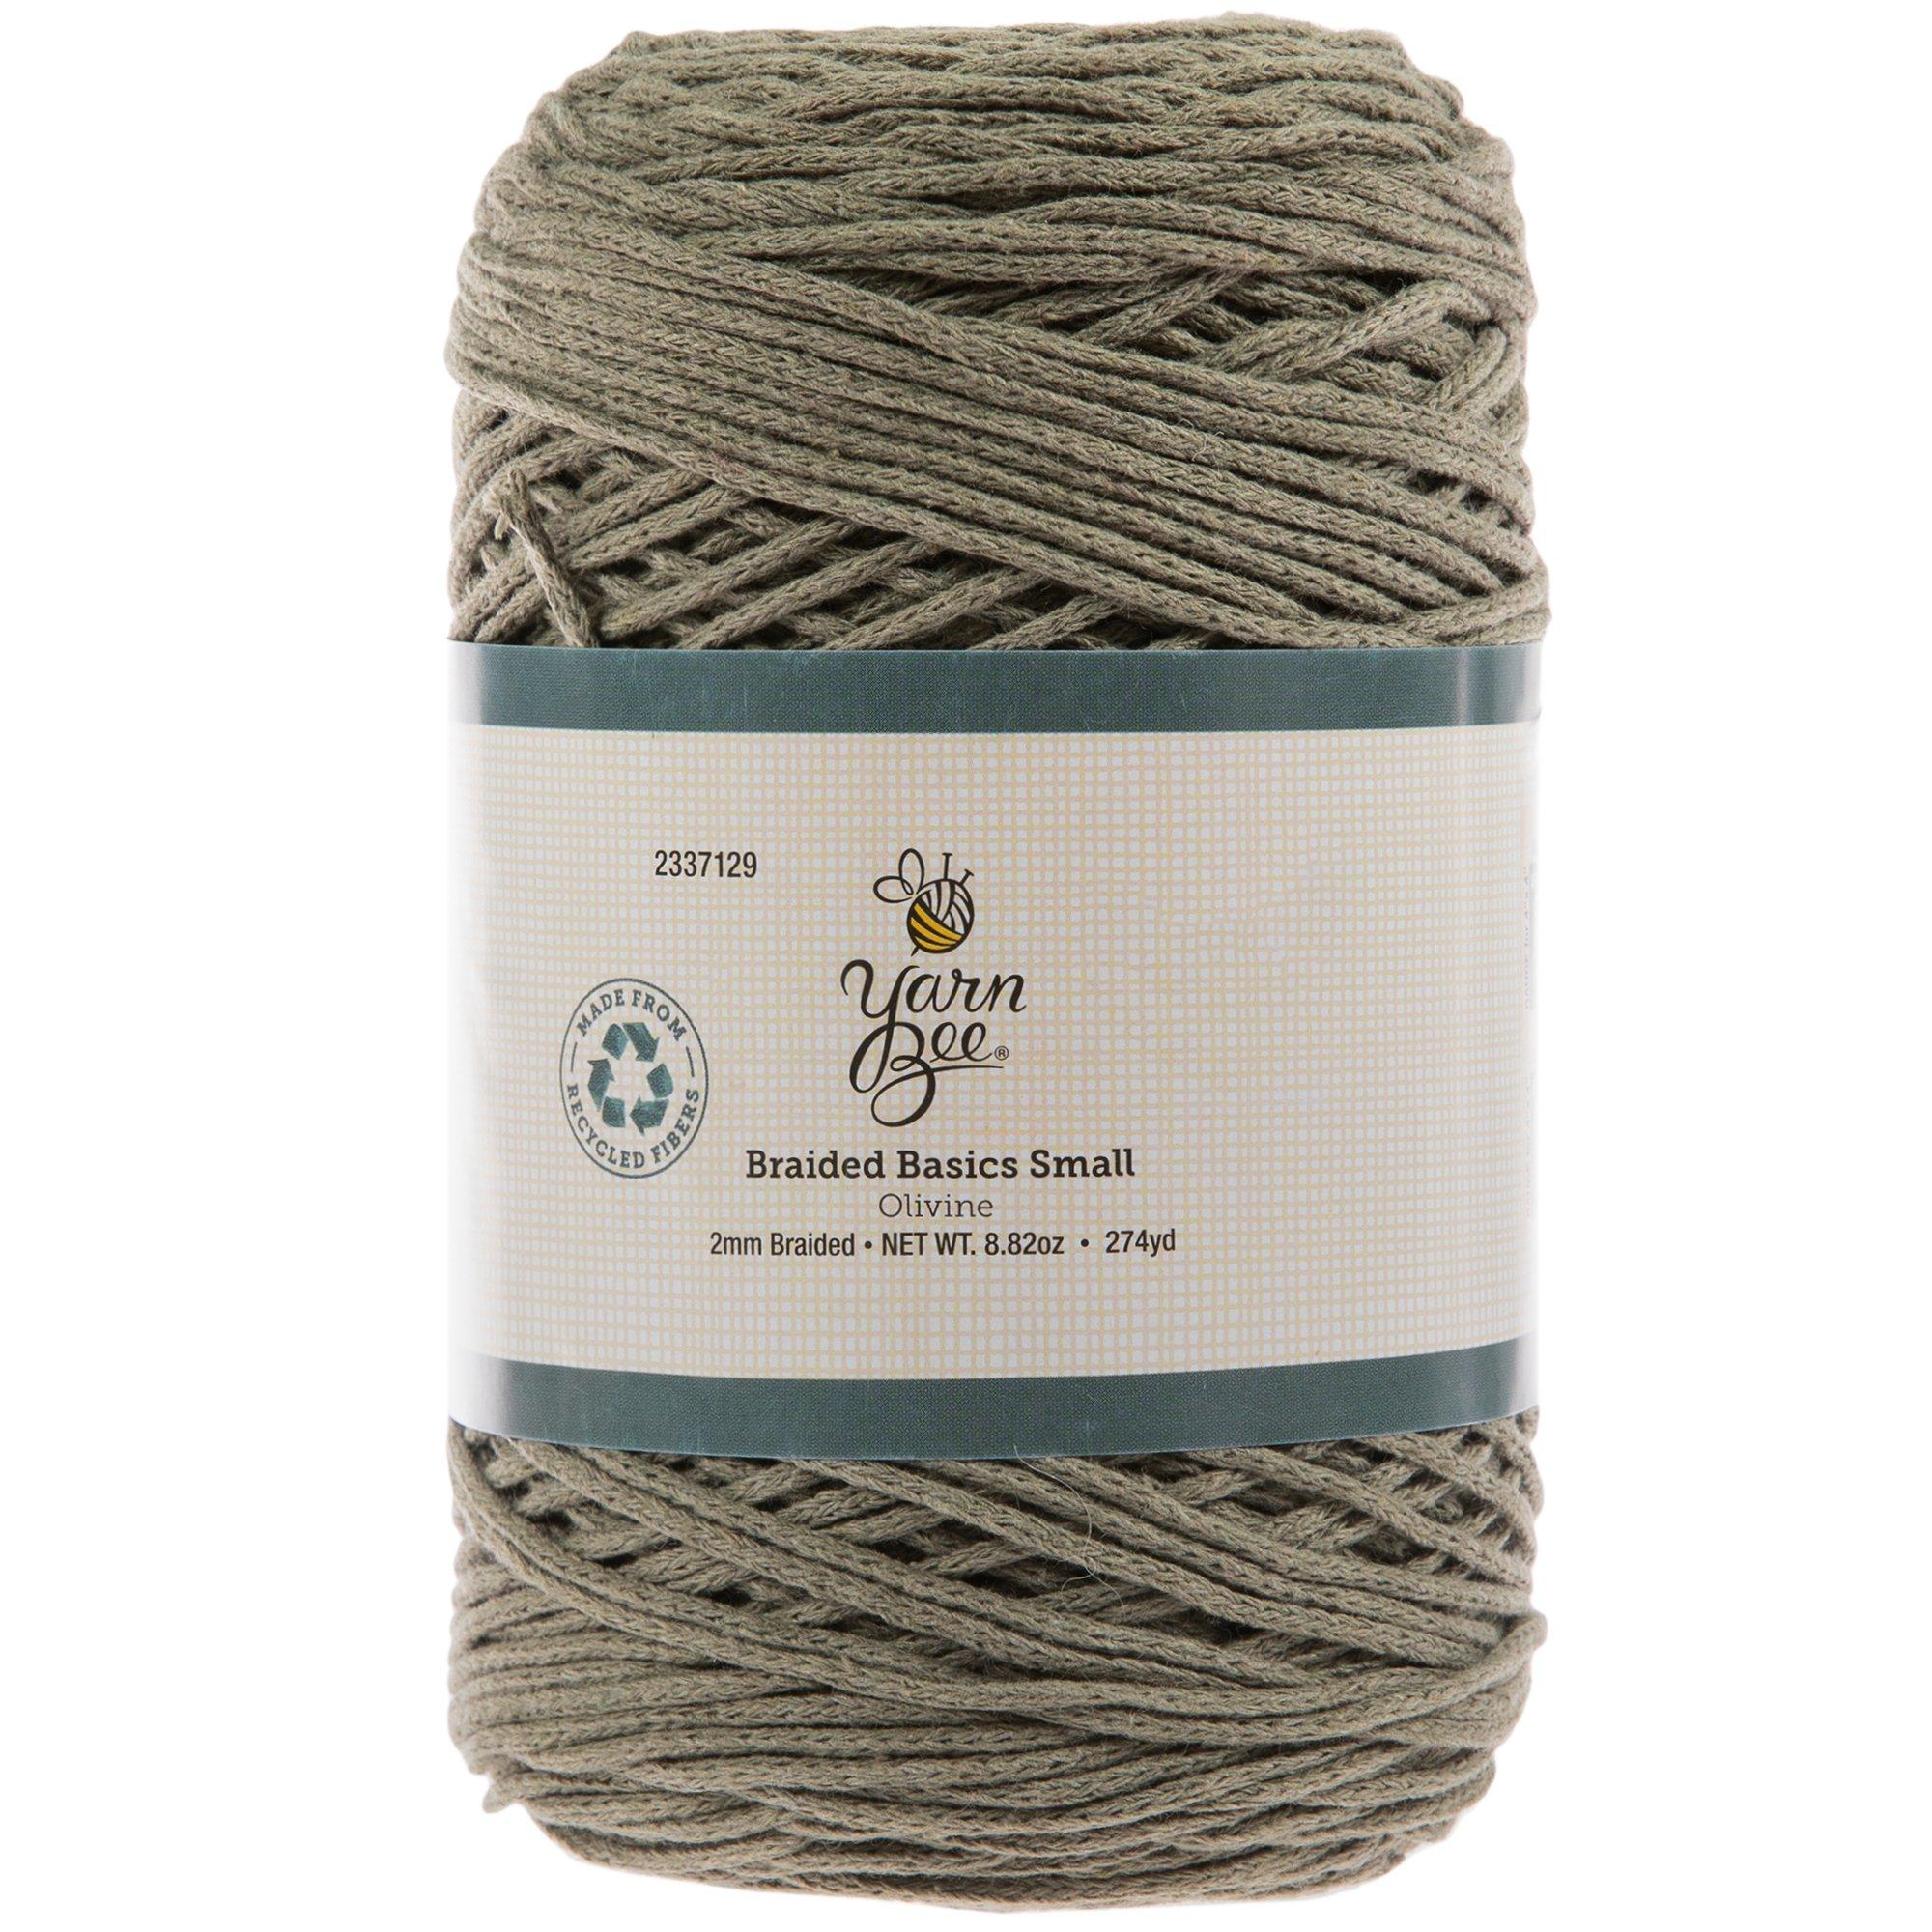 1 Skein ( Skeins Available from 3 Colors) Yarn Bee Soft & Sleek